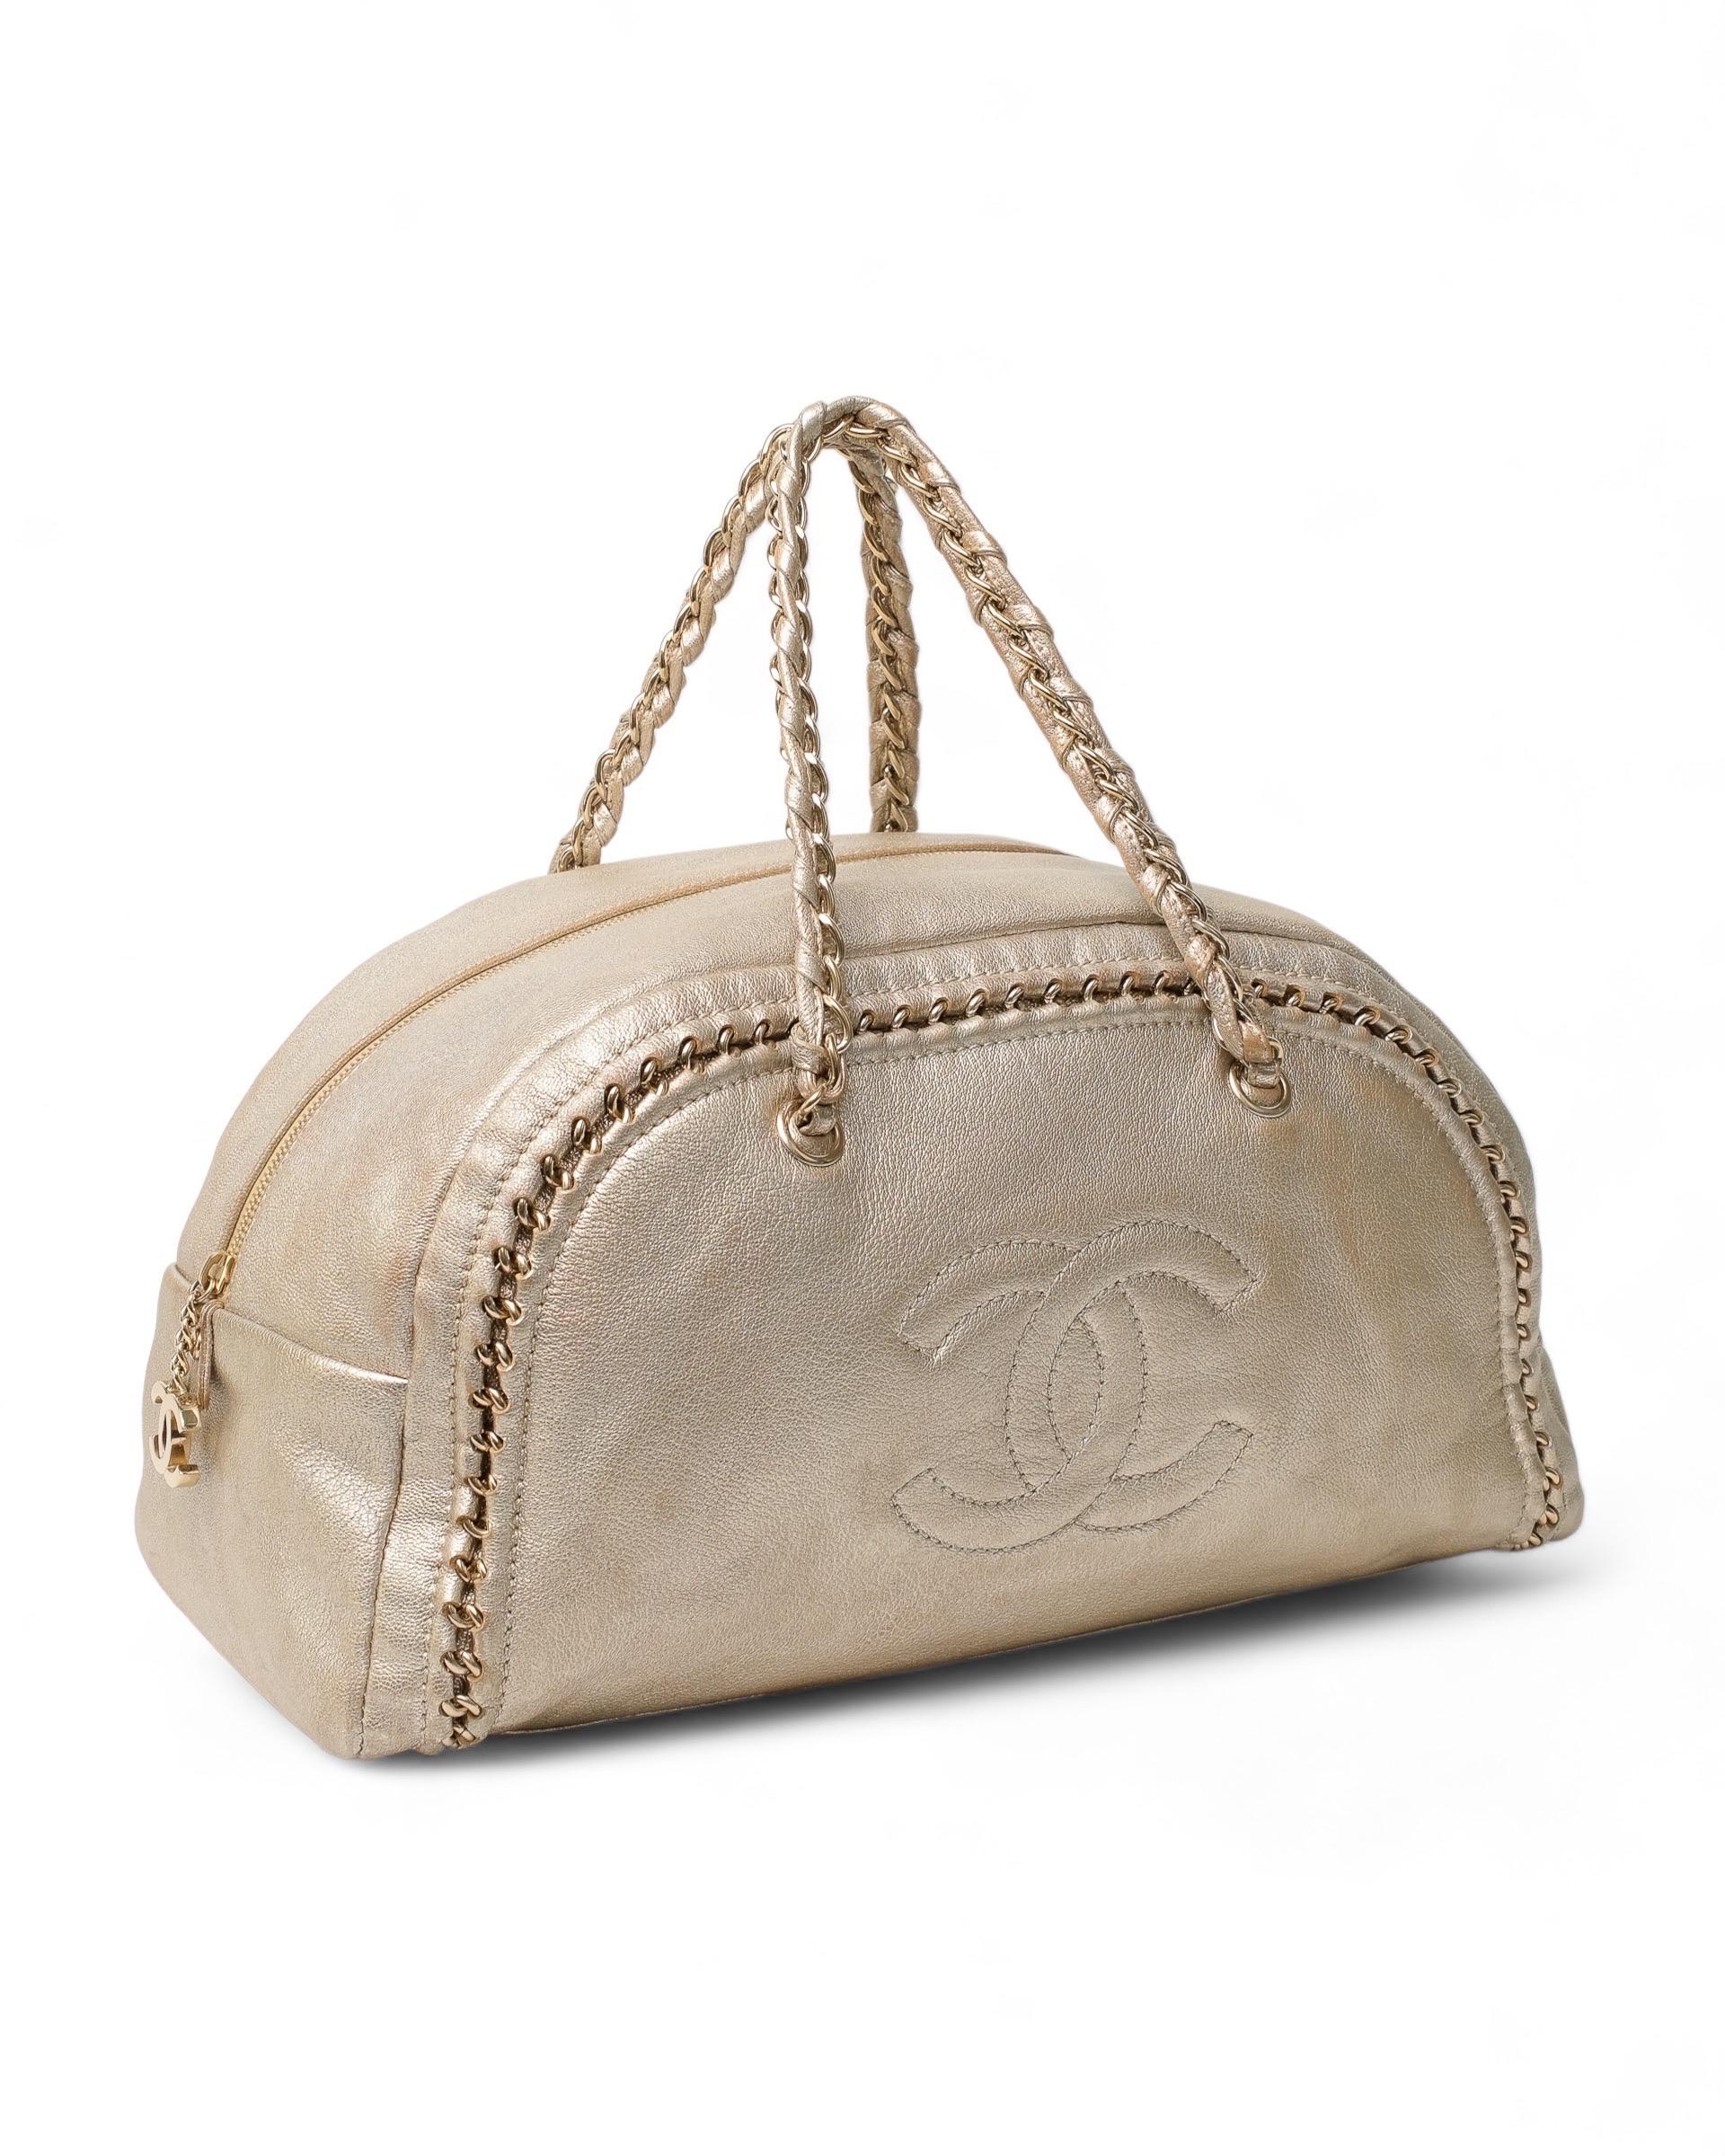 Chanel Bowling Metallic Gold Pelle Borsa a Mano  In Good Condition For Sale In Torre Del Greco, IT